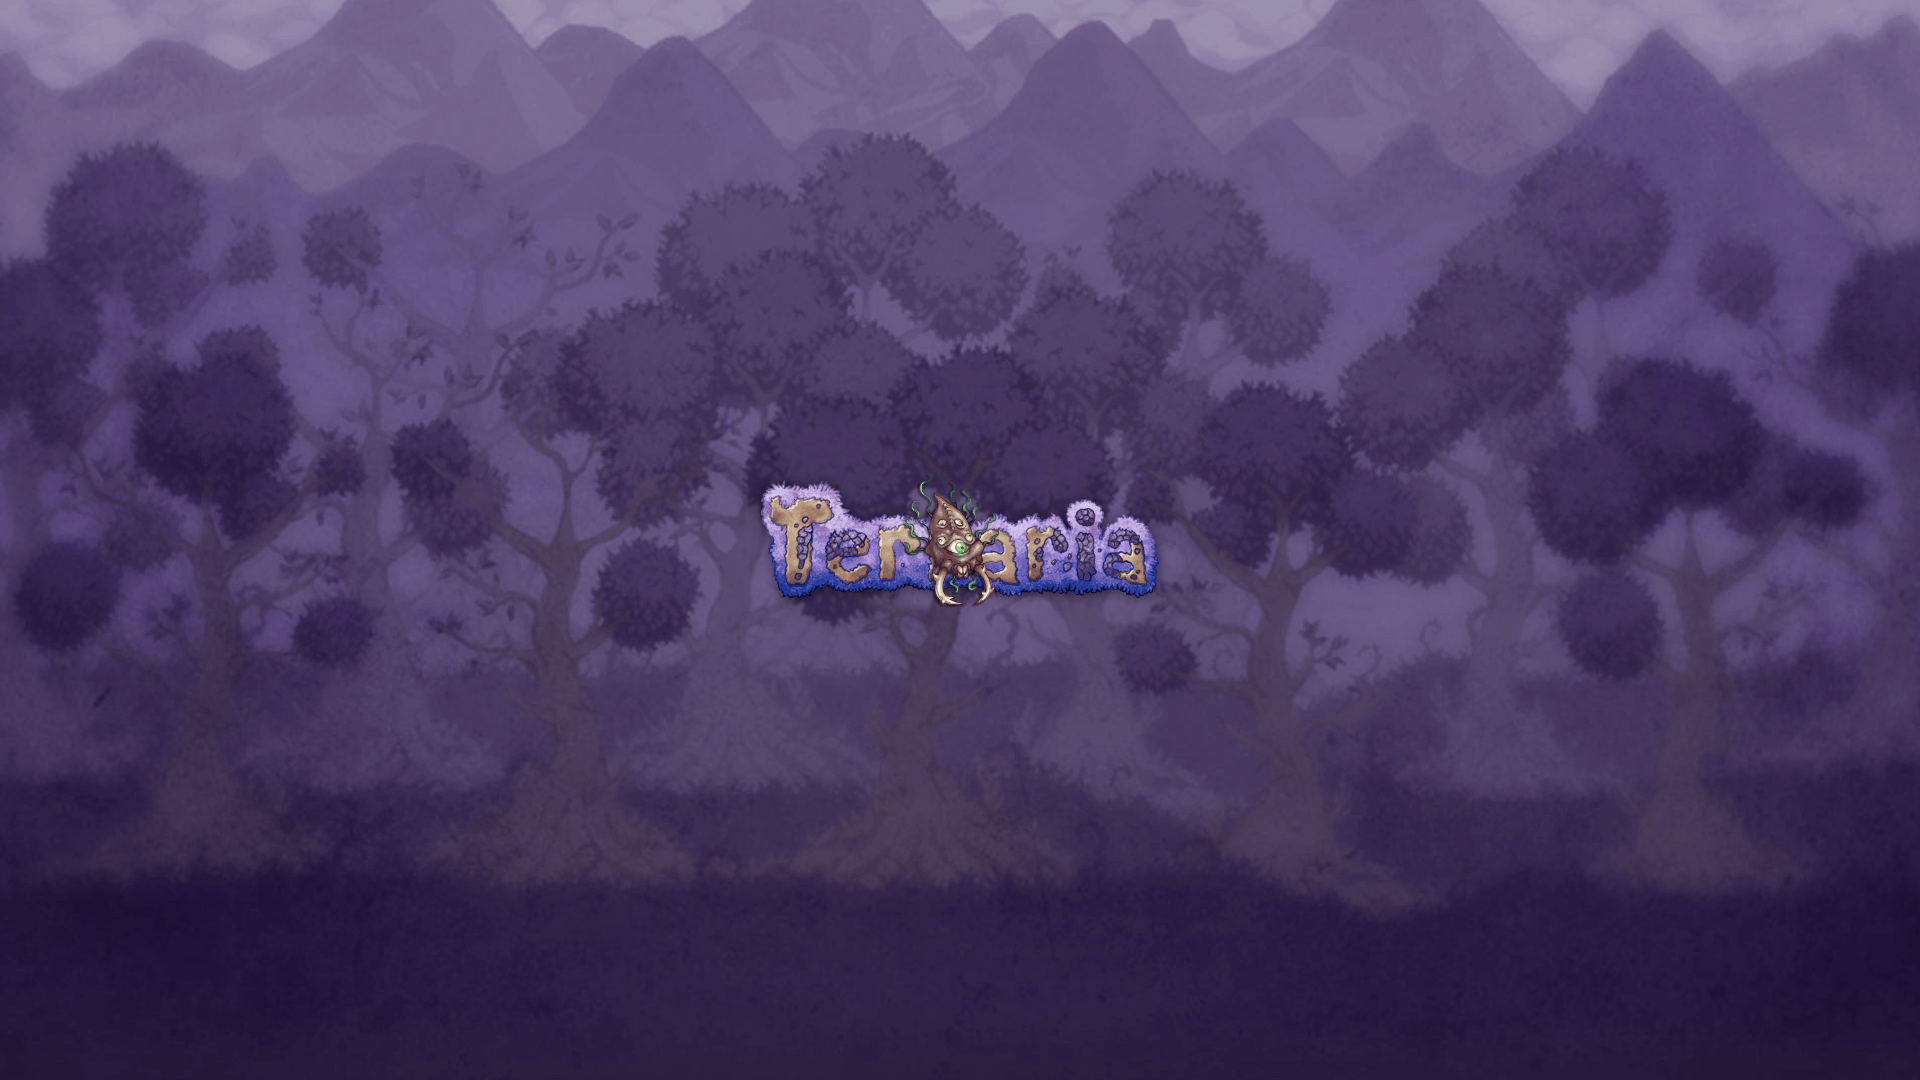 Terraria forest background фото 100